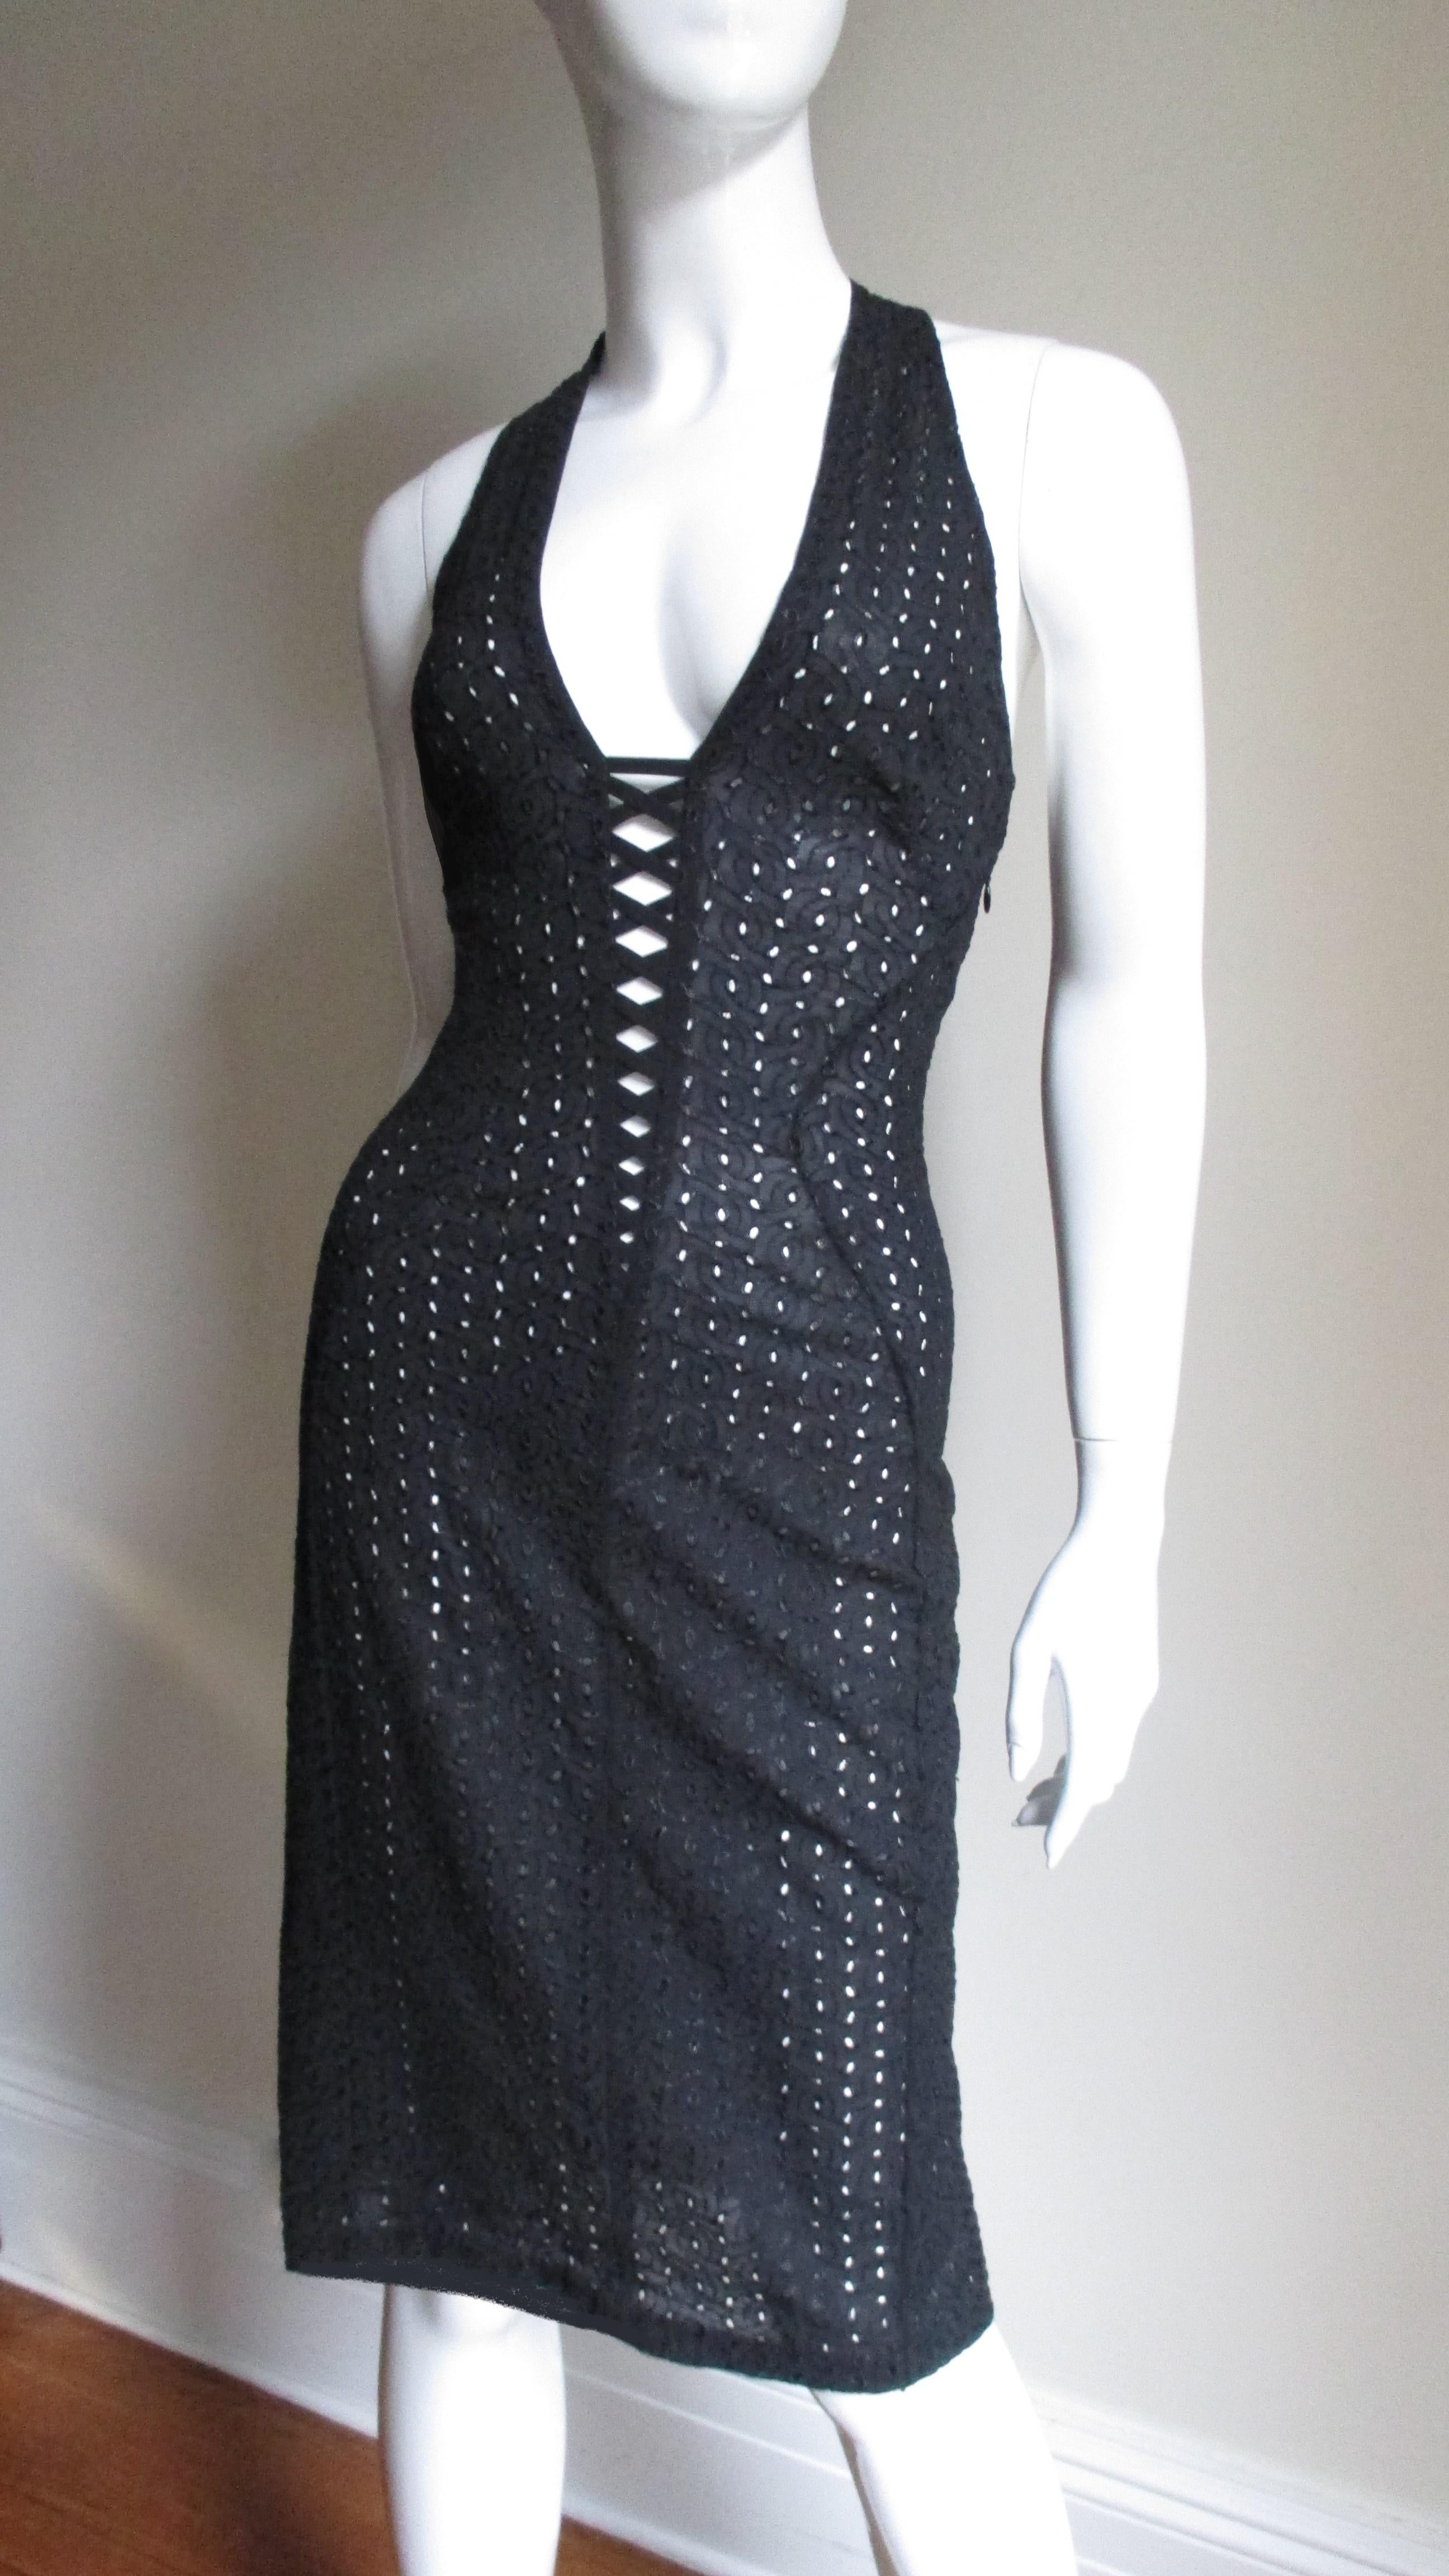 A fabulous bodycon dress in black silk eyelet by Gianni Versace Couture.  It has a plunging neckline with lacing and straps crossing at the upper back.  The dress has flattering seaming cutting in along the sides of the waist. It is unlined, has